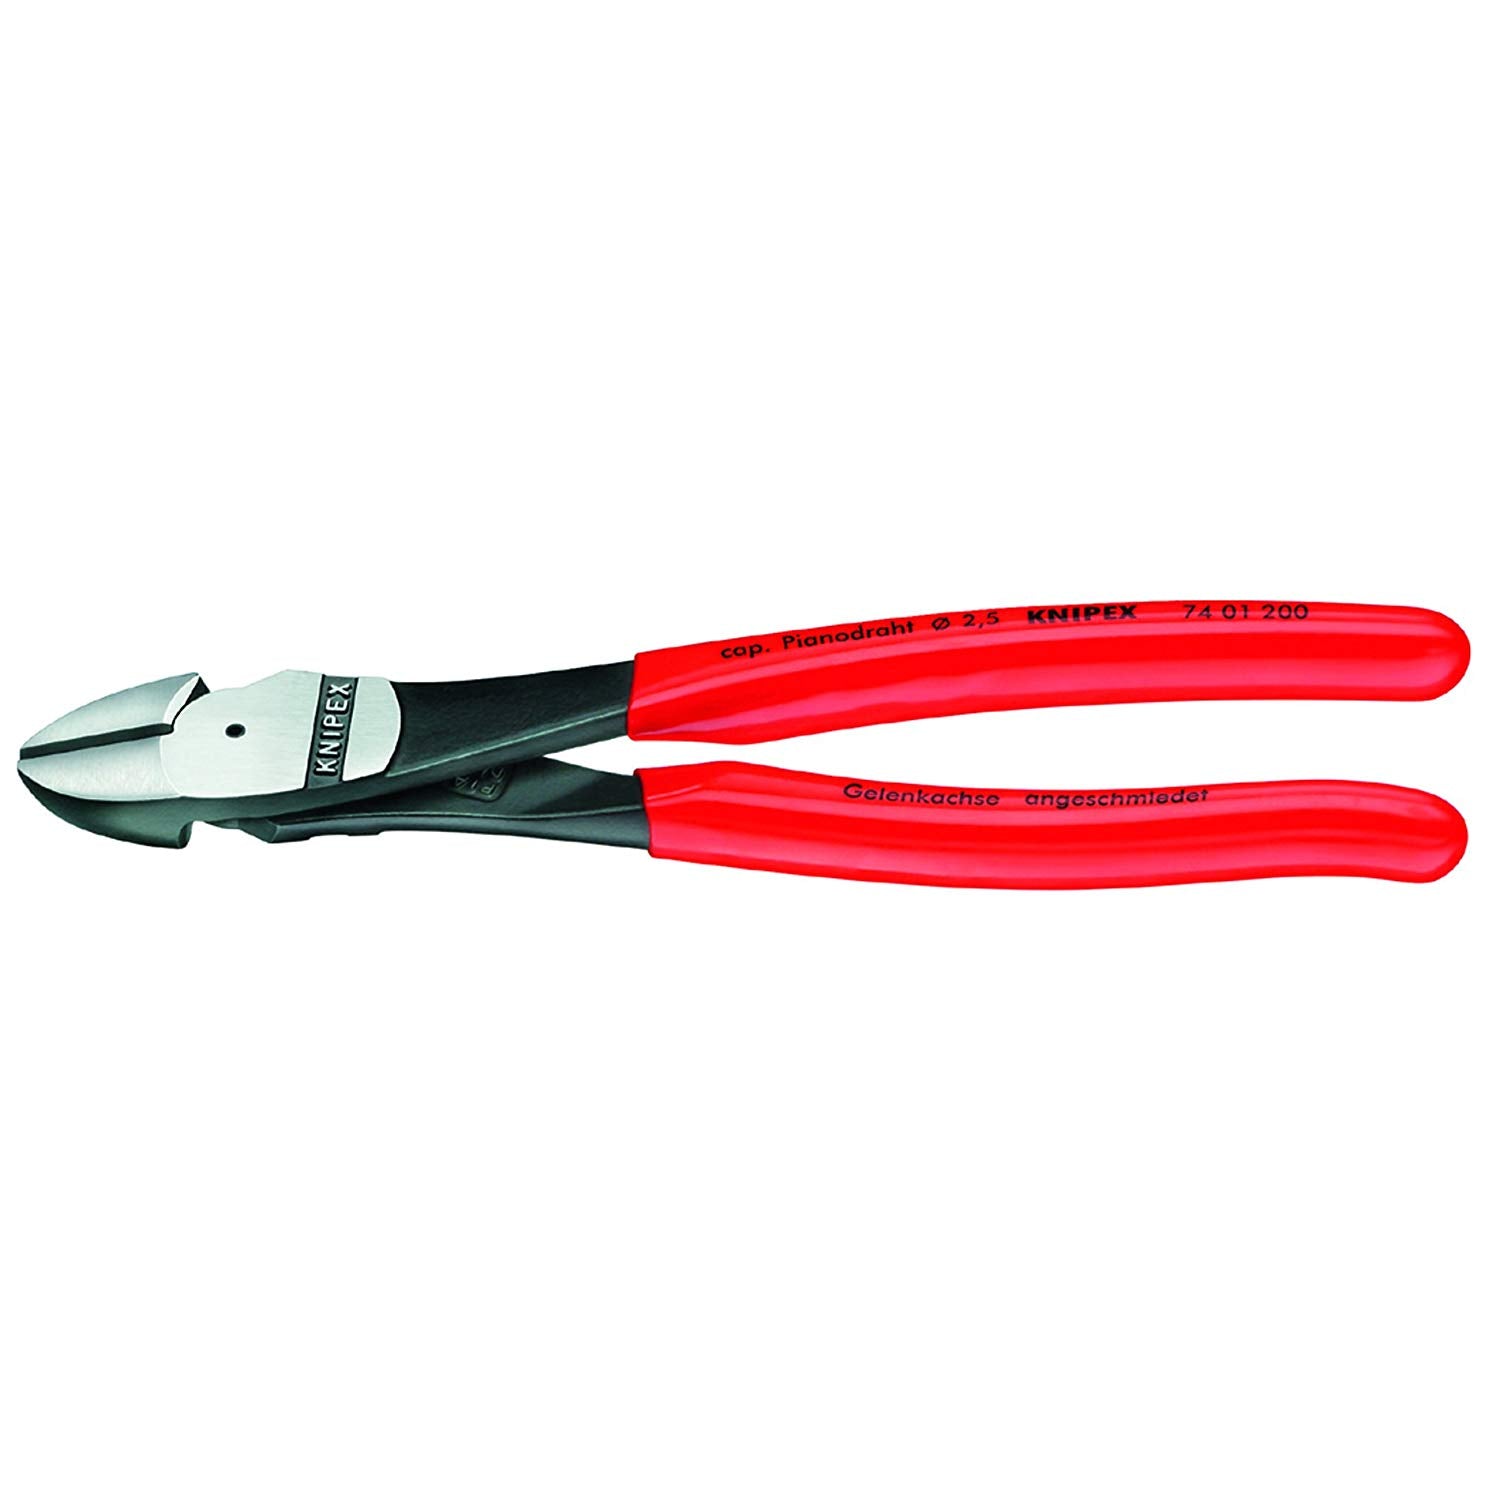 Knipex 7401200 - 8" Diagonal Cutter - wise-line-tools